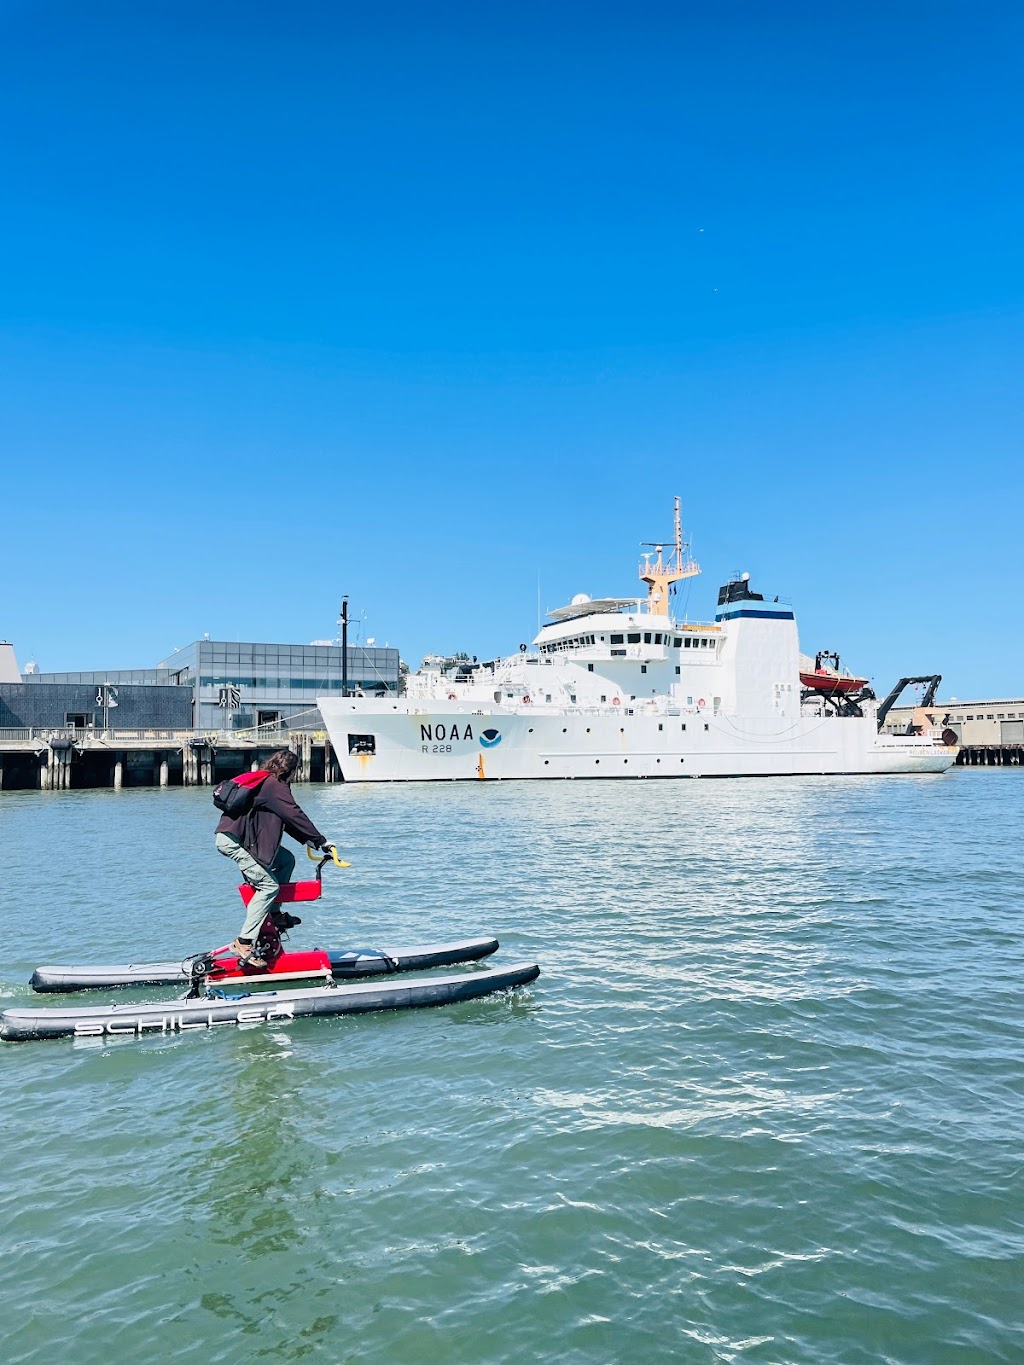 SpinOut Fitness | Harbor Marina Launch Location, Gate 02 / Dock C HQ in the Pier 40 Building, Pier 40, San Francisco, CA 94107 | Phone: (415) 855-7746